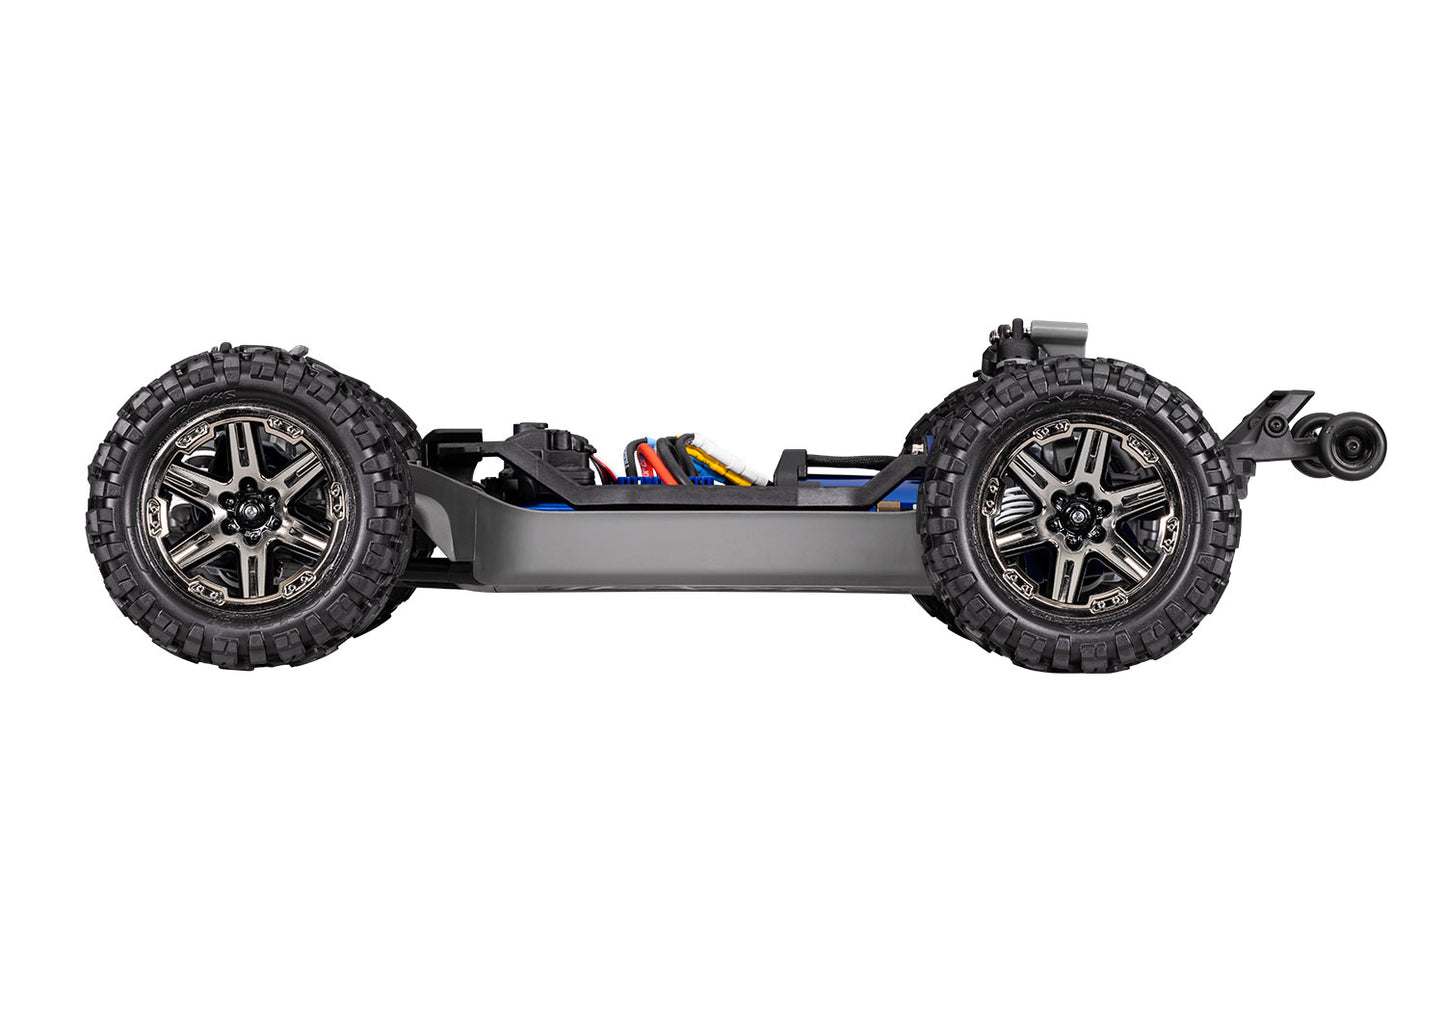 Traxxas 67376-4 GREEN Rustler 4X4 VXL: 1/10 Scale Stadium Truck with TQi™ Traxxas Link™ Enabled 2.4GHz Radio System & Traxxas Stability Management (TSM)®